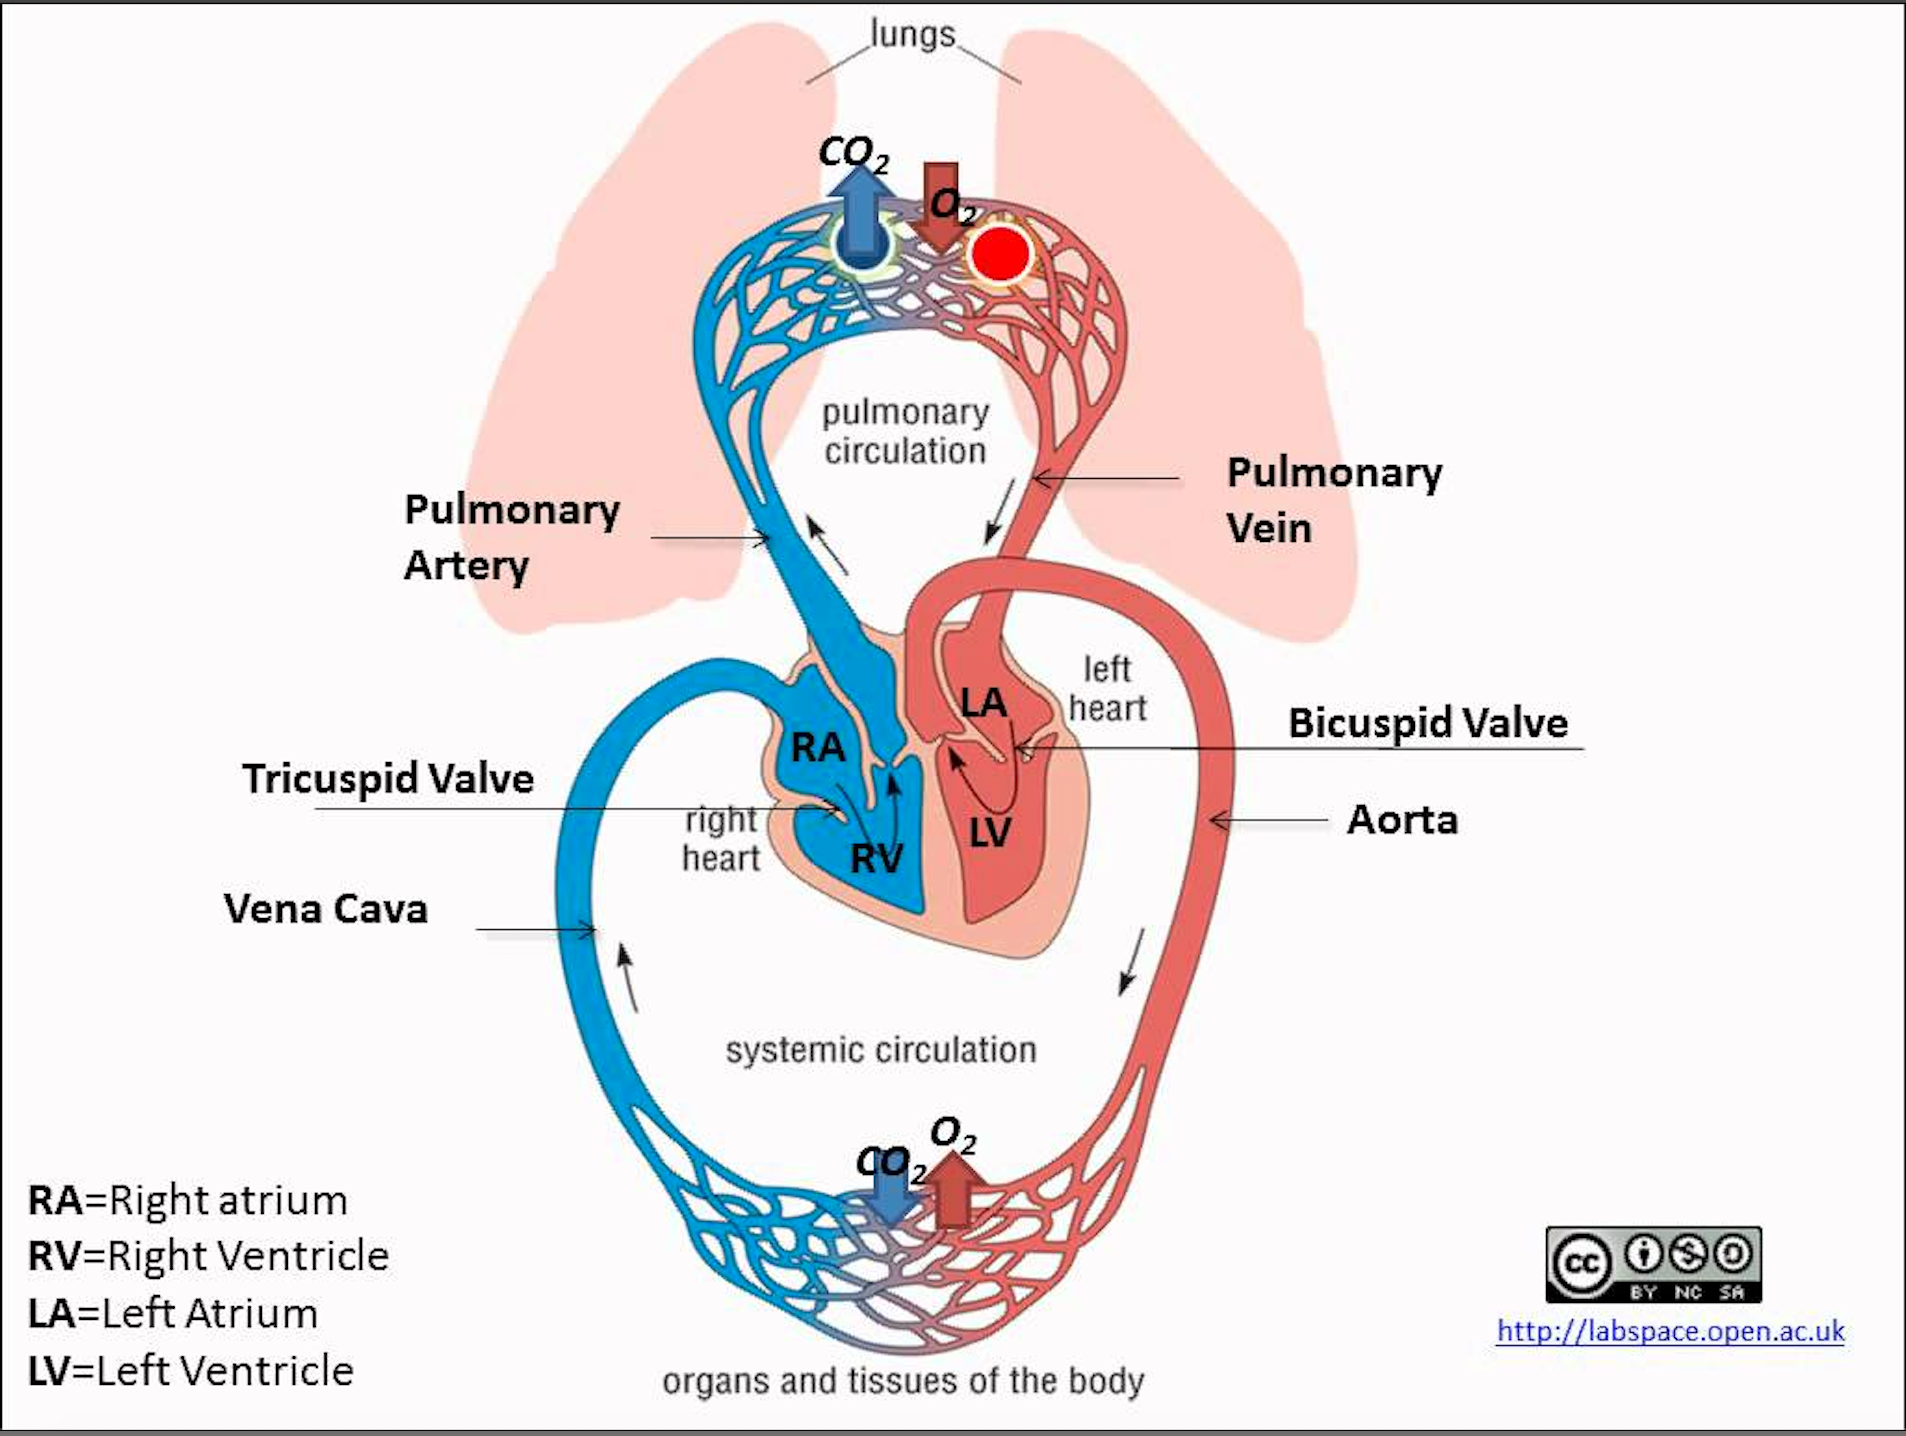 A more detailed schematic of the blood flow in the heart and circulatory system. Key anatomical structures are labeled, such as; the four chambers of the heart, the tricuspid valve, bicuspid valve, aorta, and vena cava. The oxygenated status of the blood in circulation is shown with emphasis on the gas exchange occurring in the pulmonary and systemic capillary beds. In the pulmonary capillaries, oxygen is brought into the blood while carbon dioxide is removed. In direct contrast, oxygen is taken from the blood, and carbon dioxide is added in the systemic capillaries.